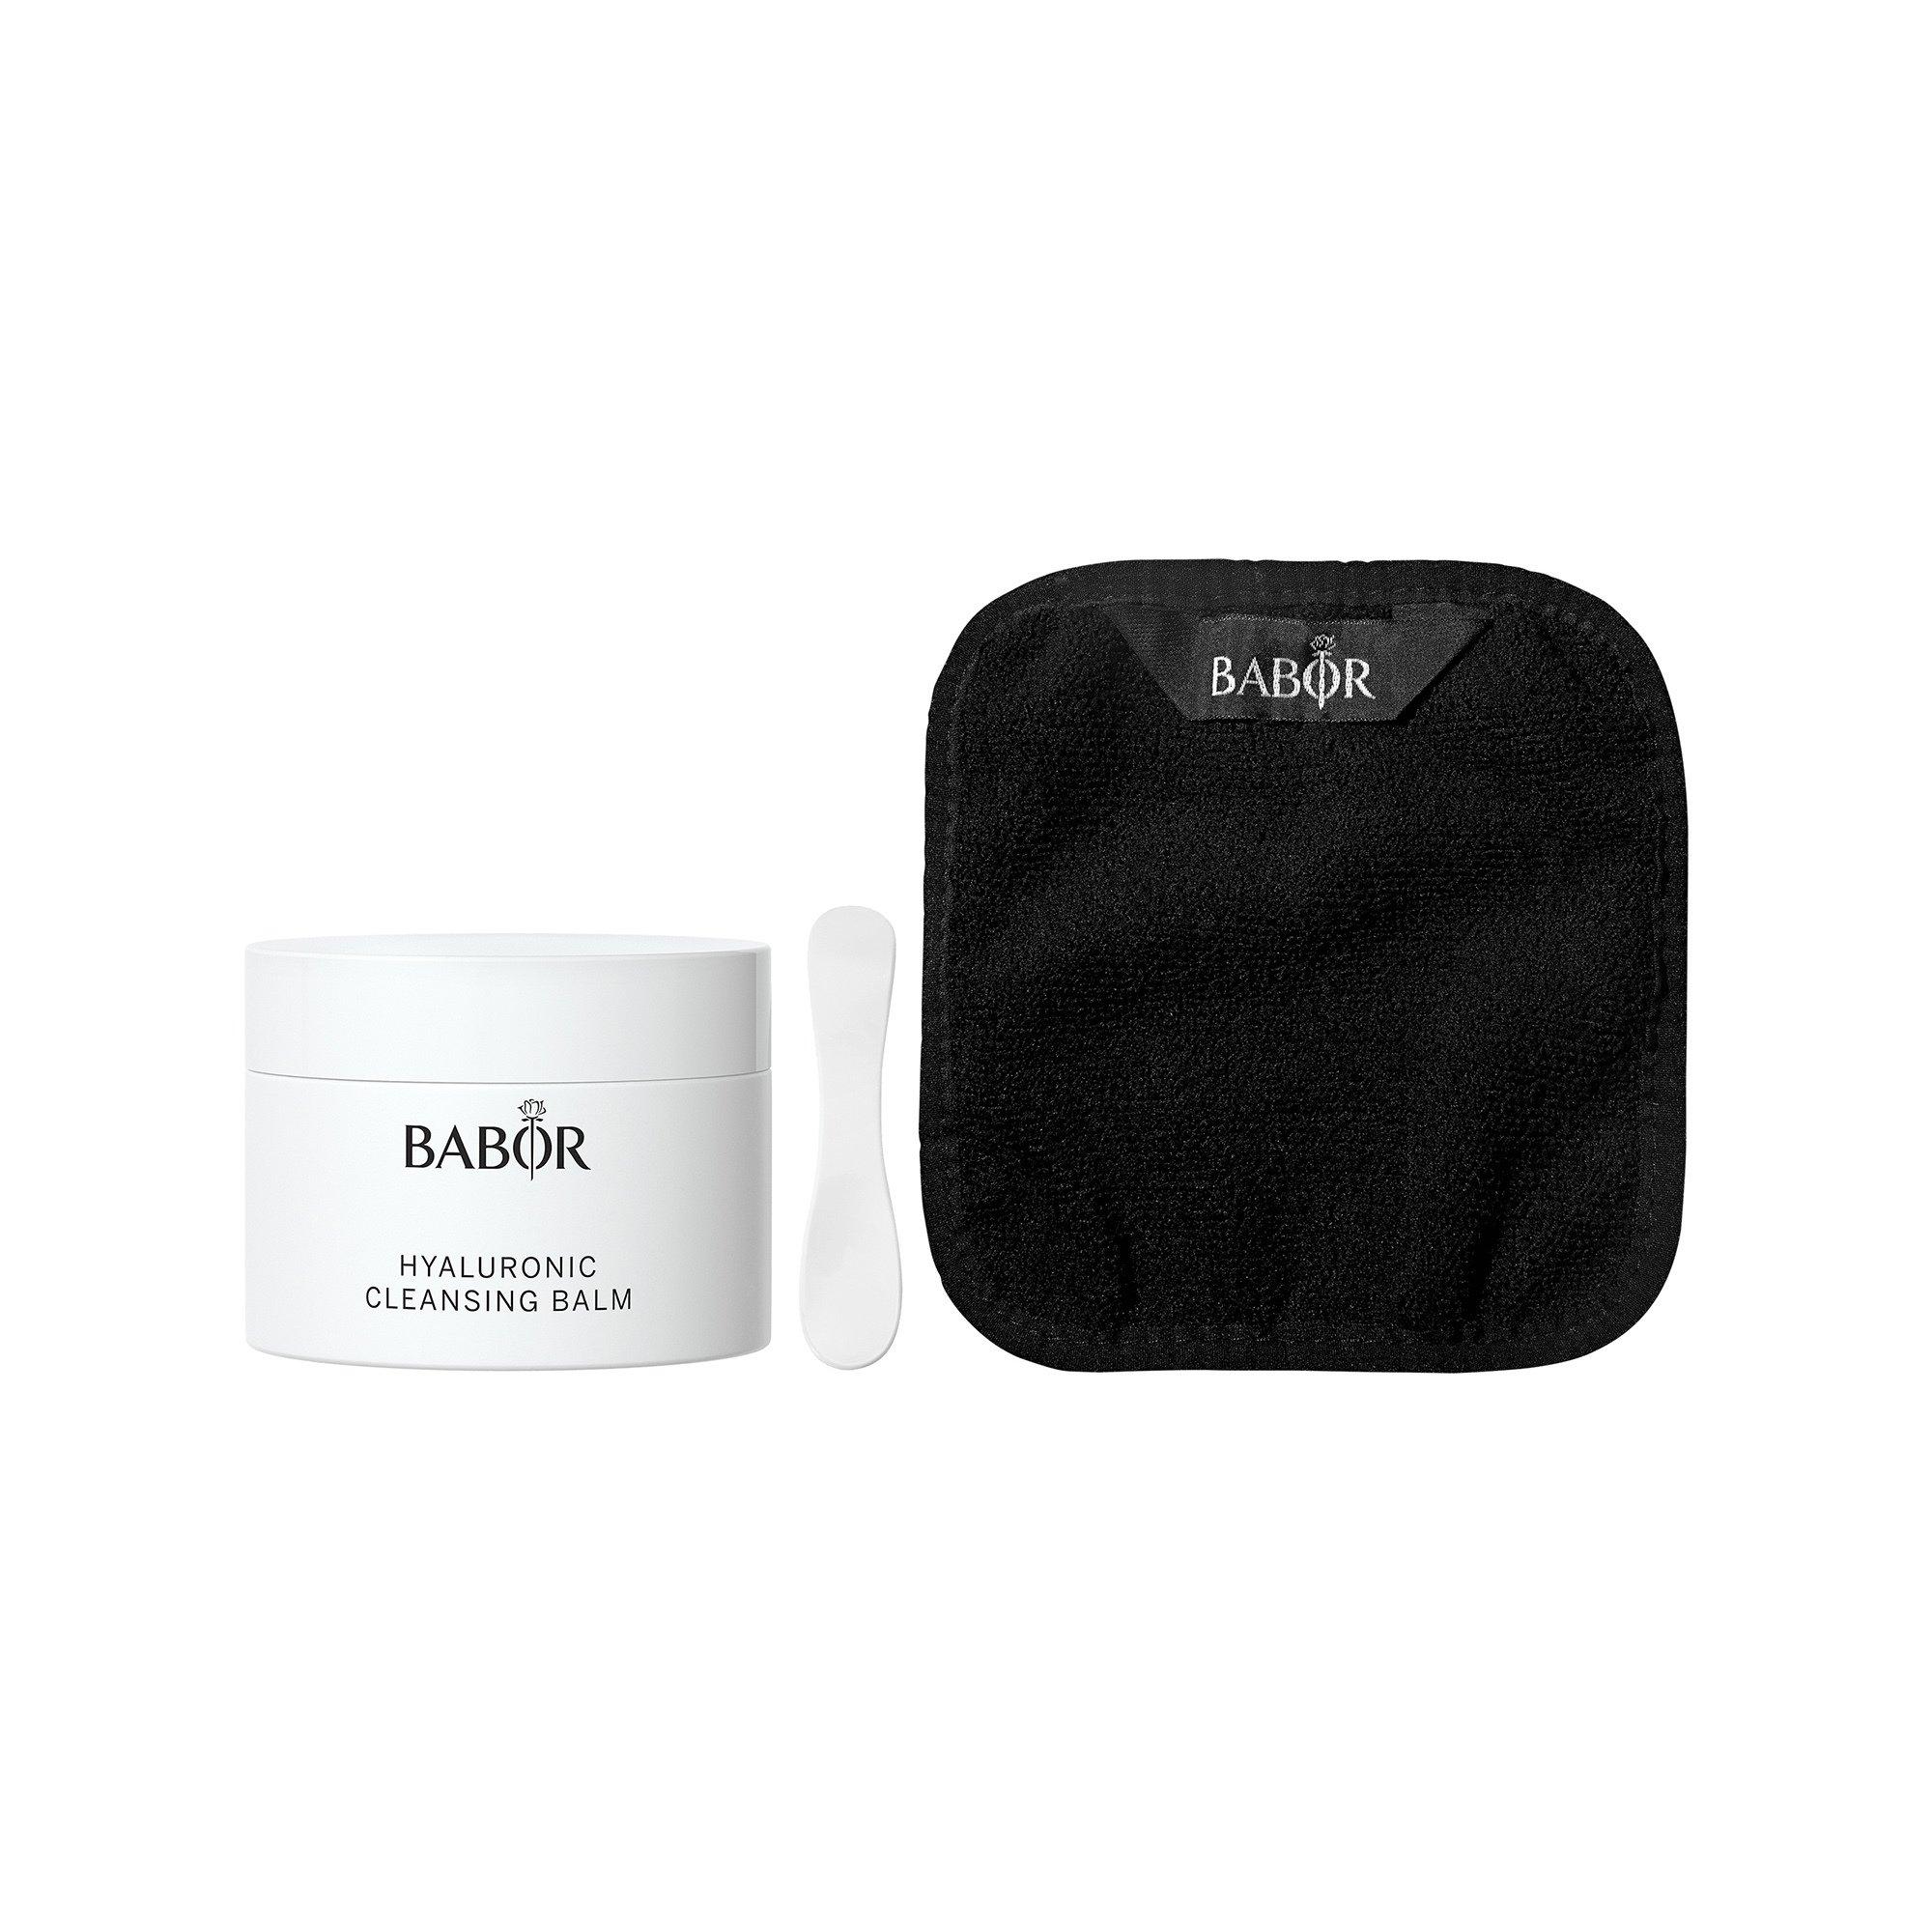 BABOR CLE Hyaloronic Cleansing Balm Hyaluronic Cleansing Balm 